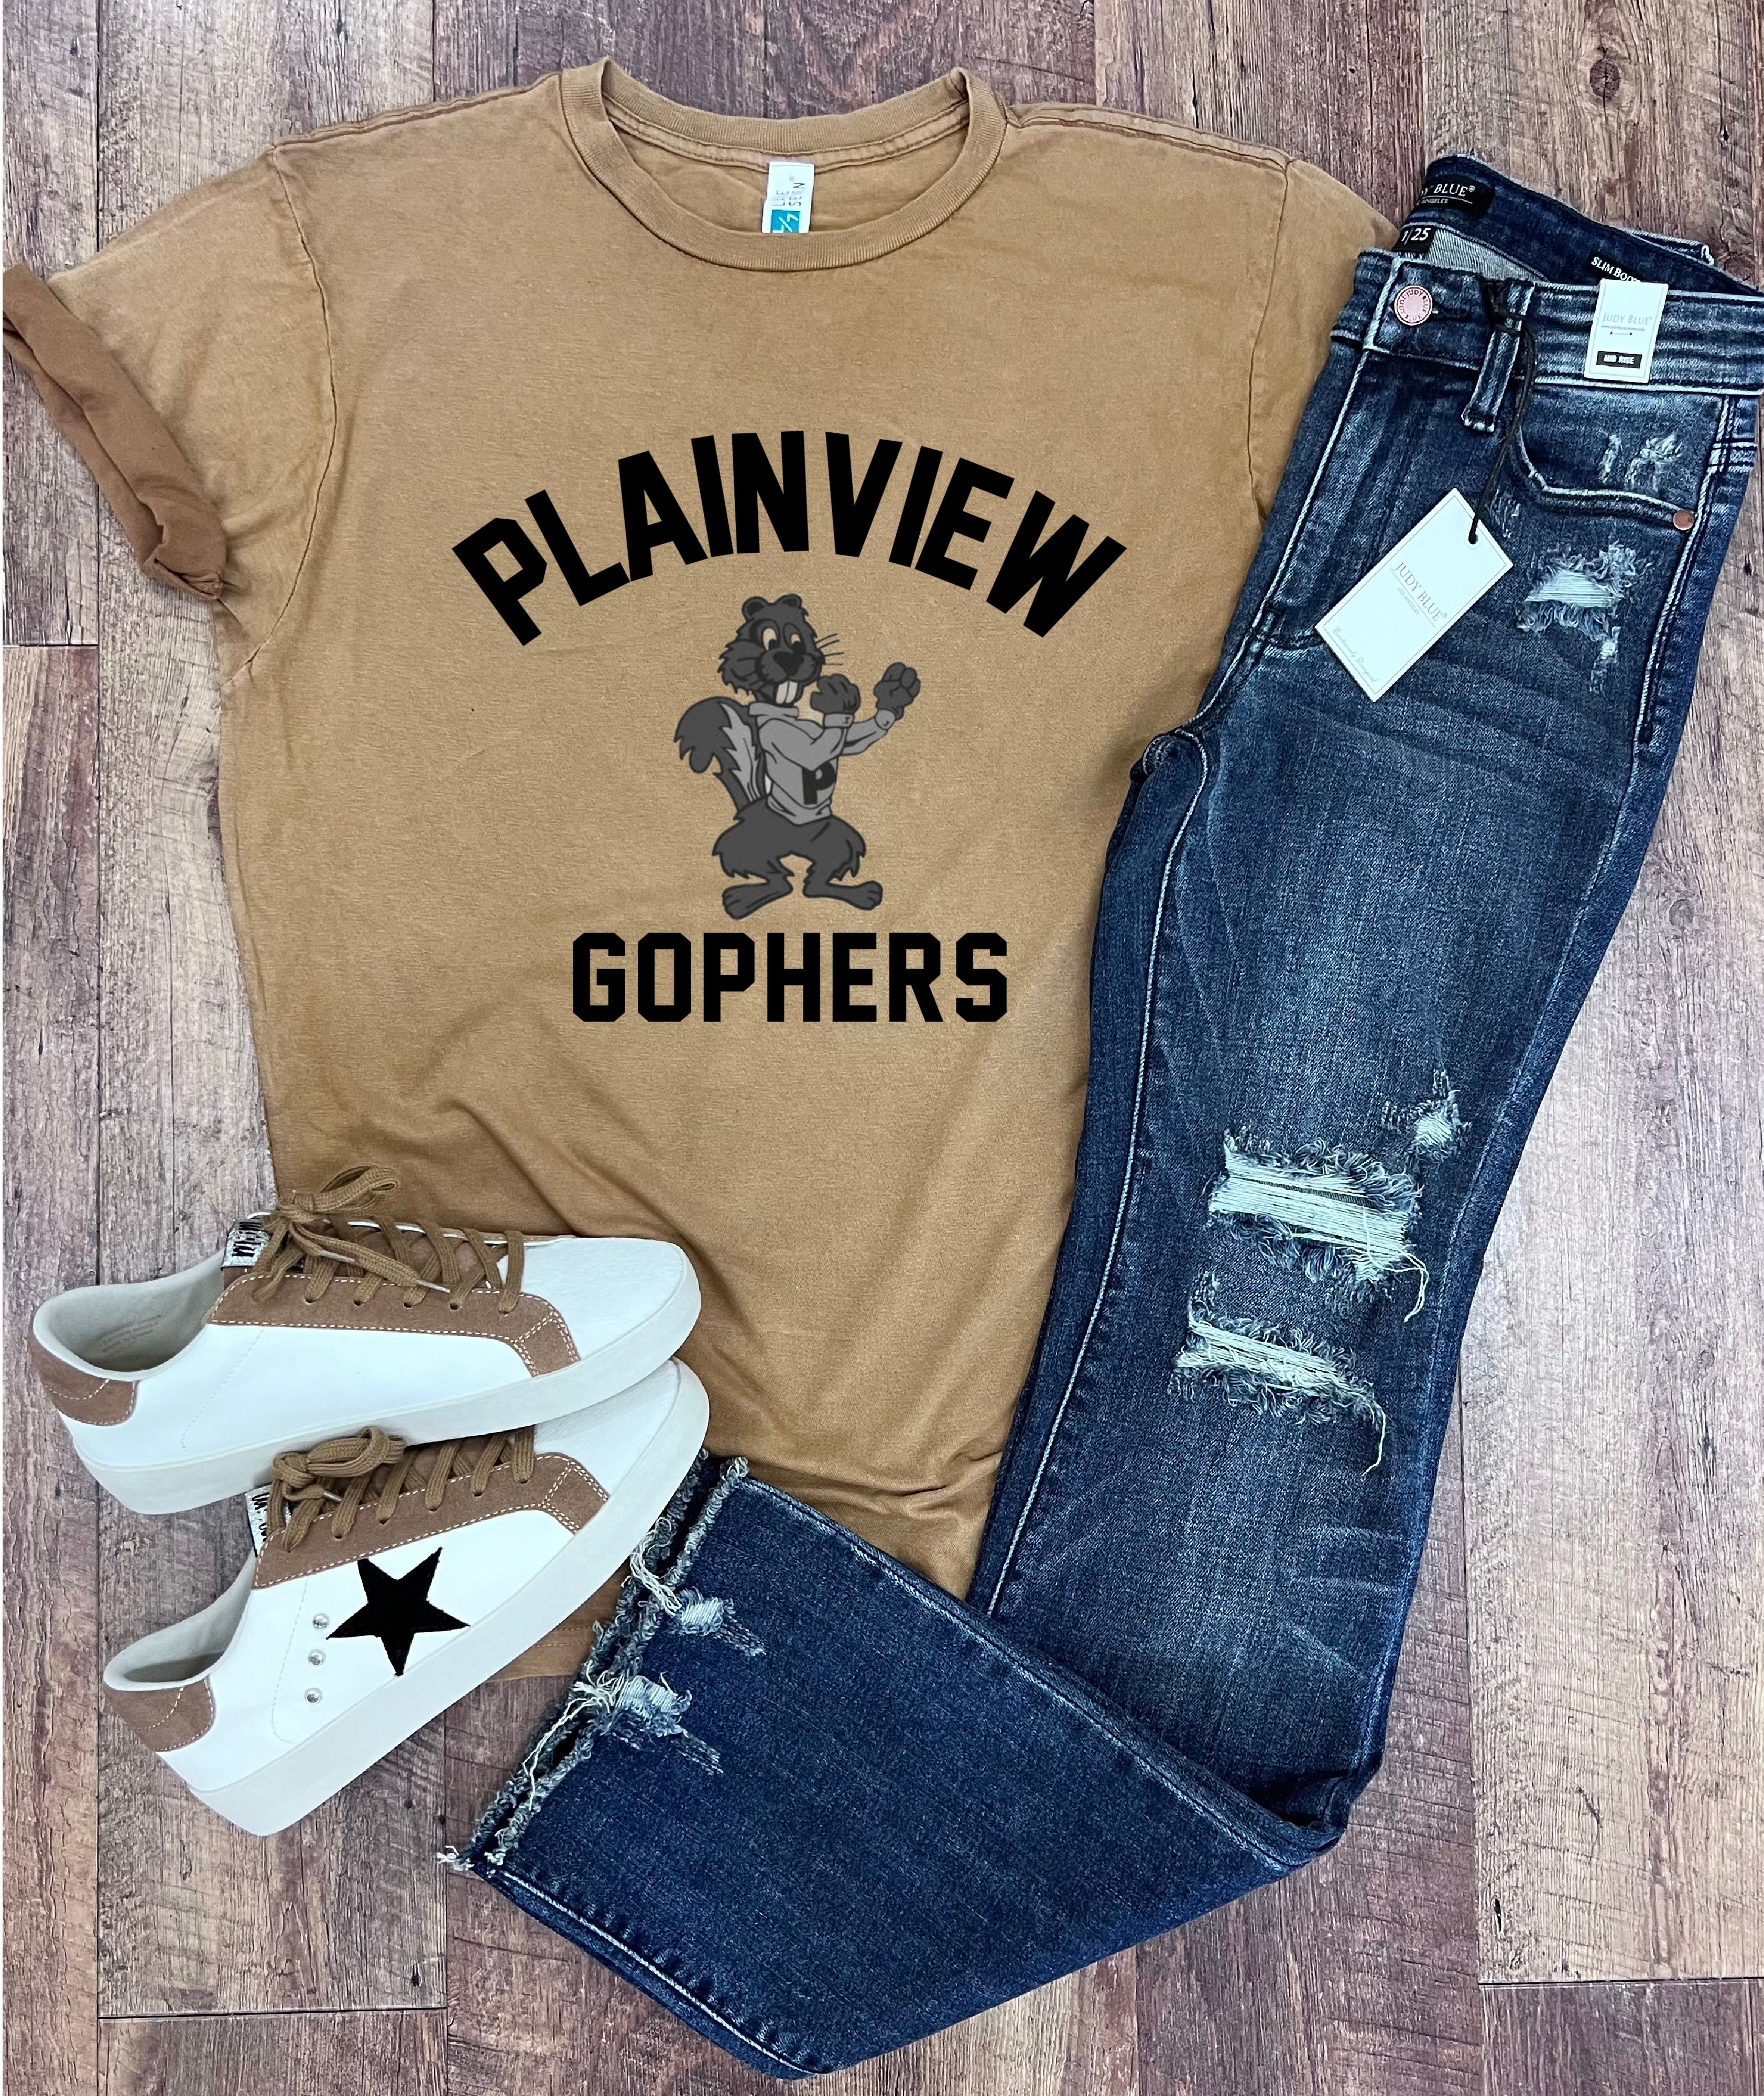 Plainview Gophers Tee in Mineral Sandstone